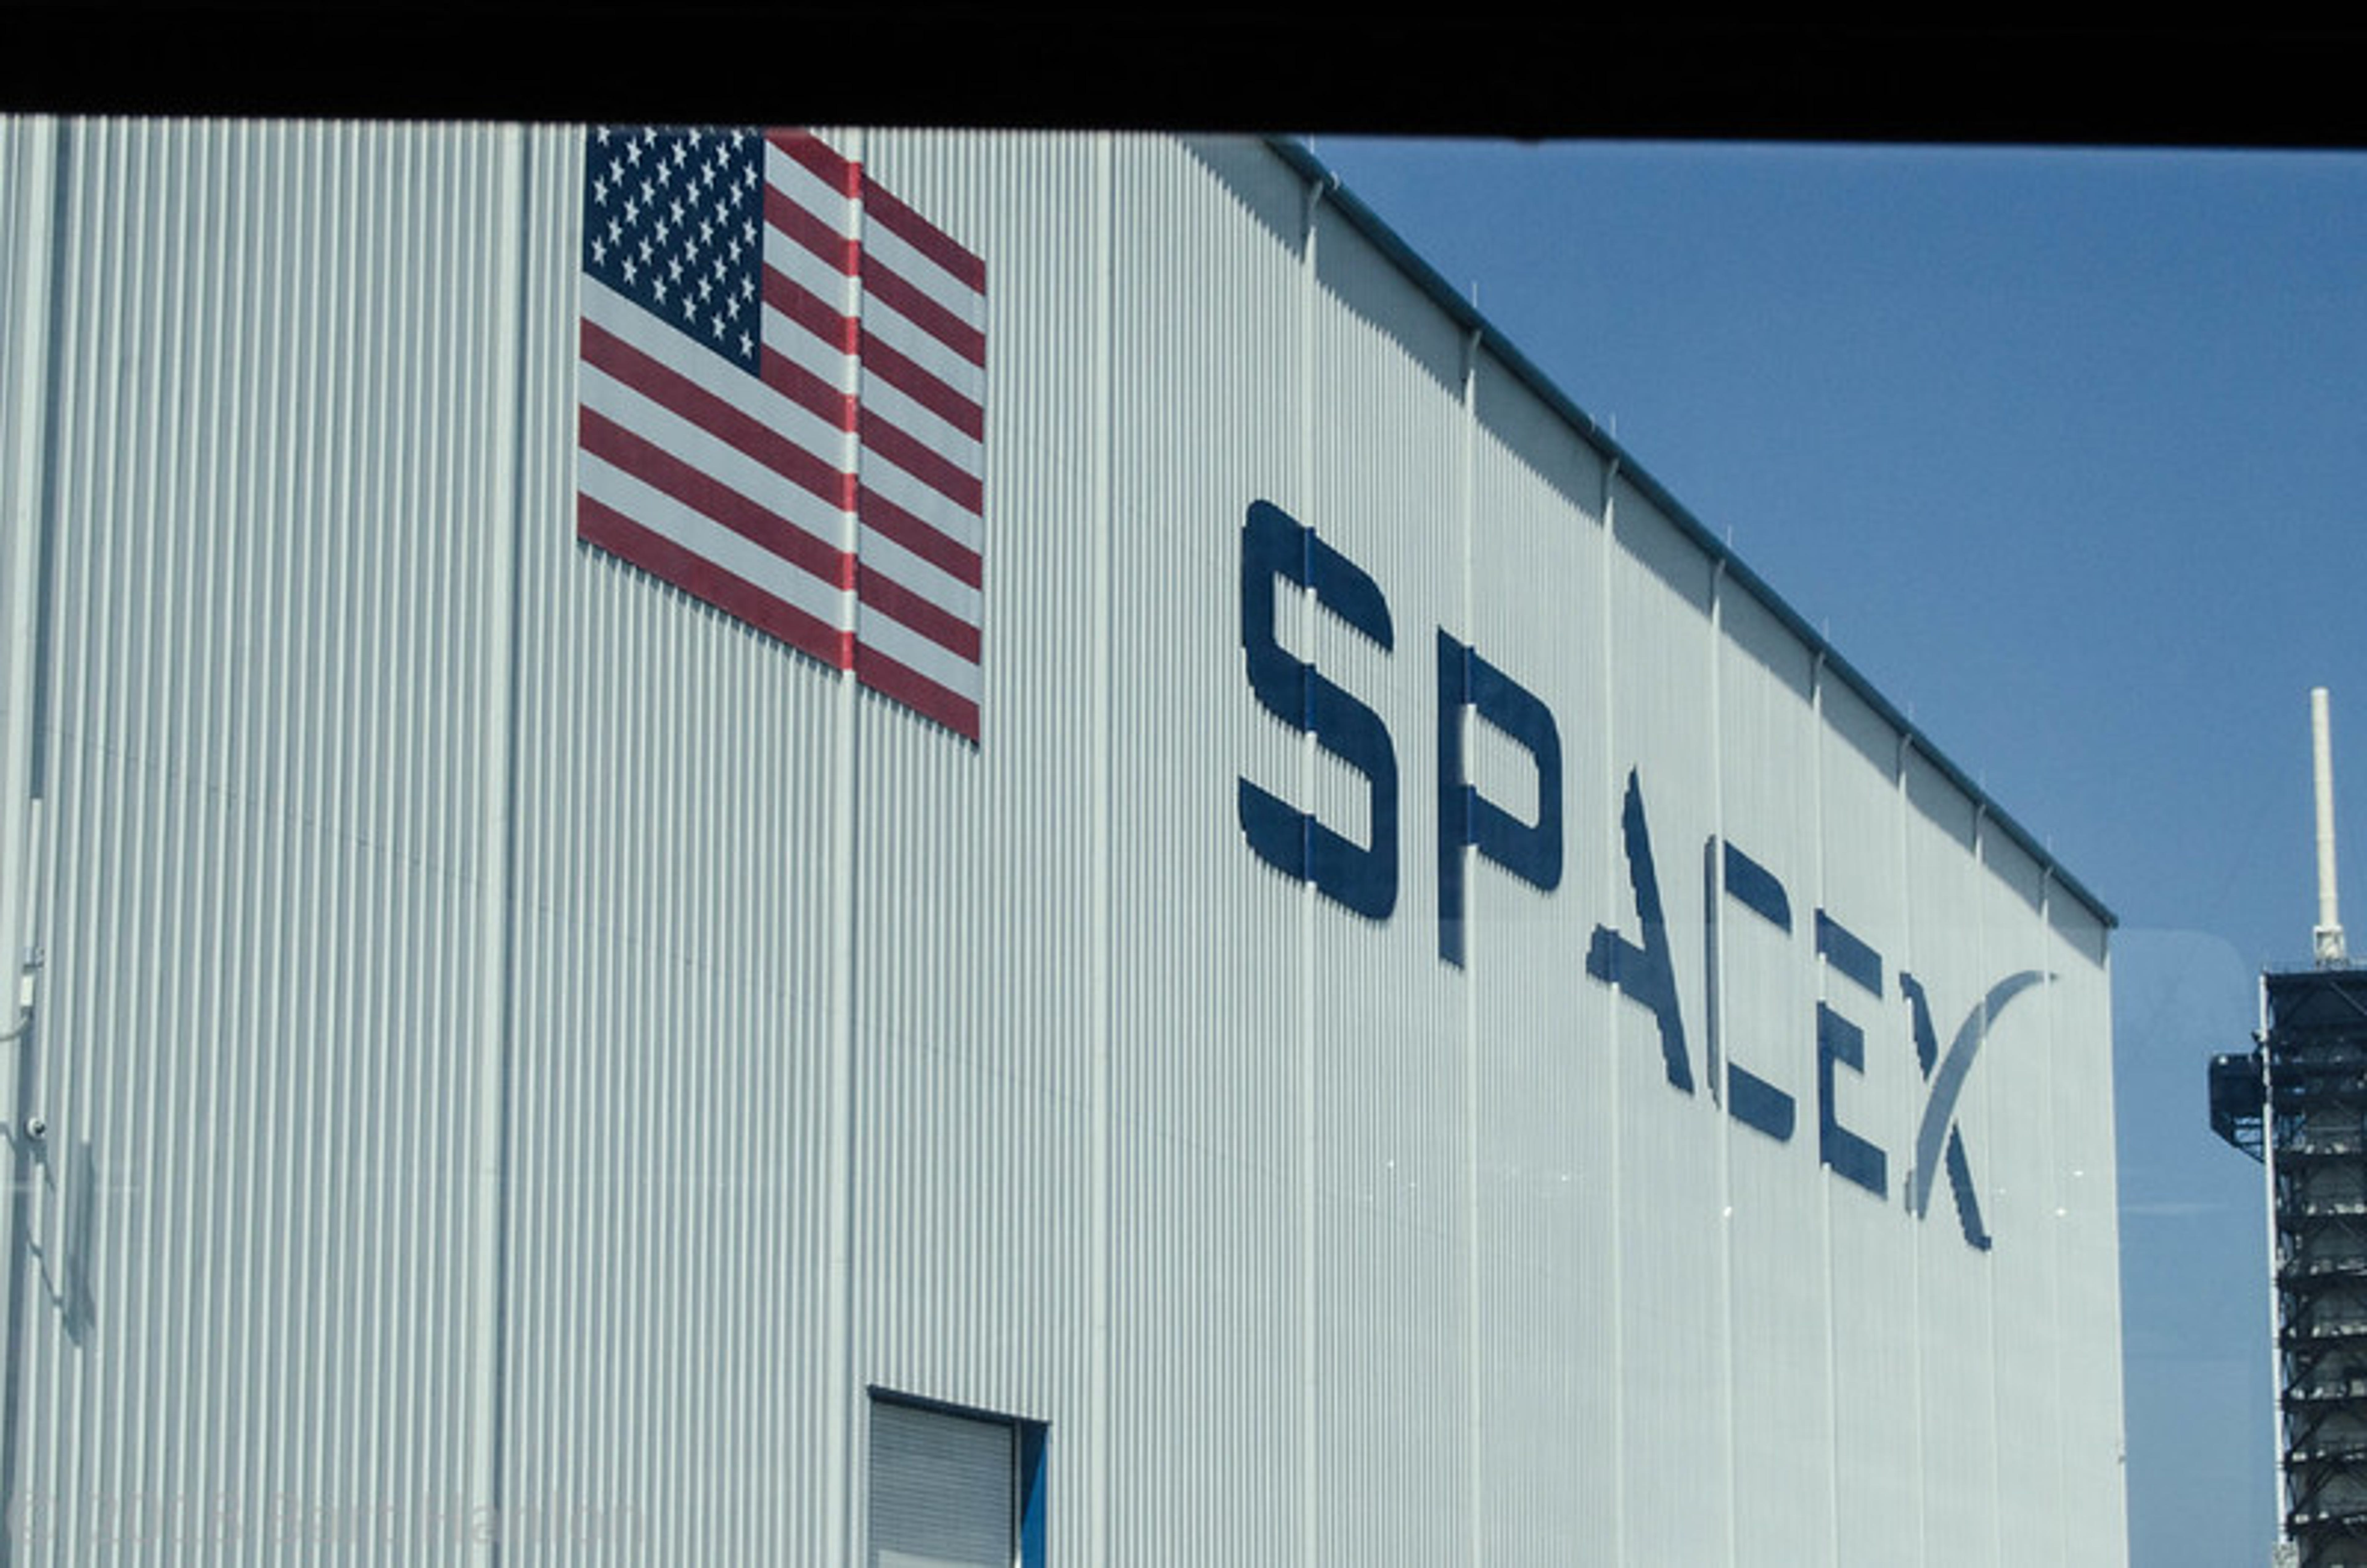 SpaceX Employees Say Elon Musk&#39;s Behavior Is An &#39;Embarrassment,&#39; Ask Company To Take Action